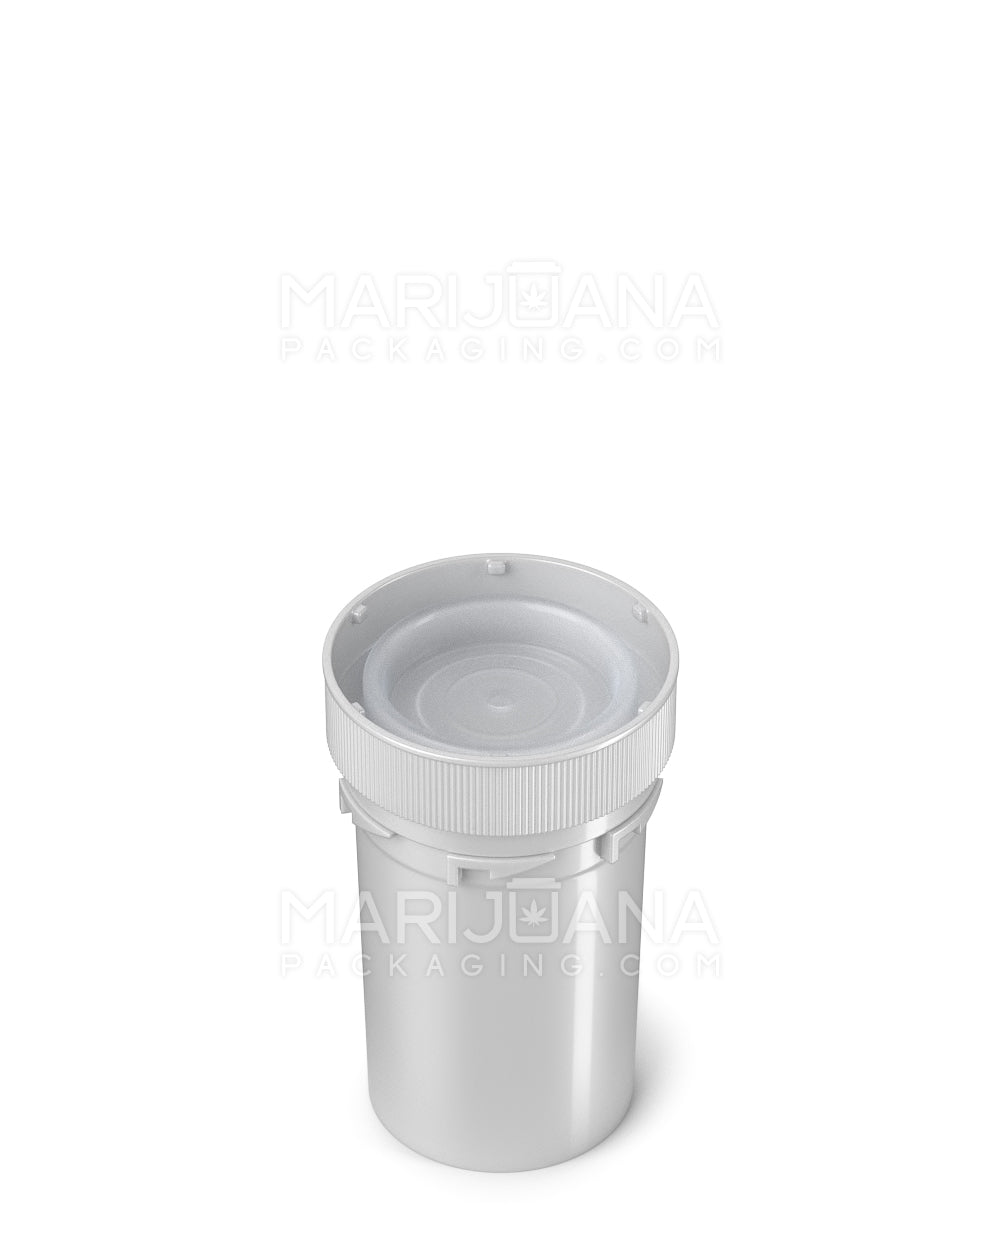 Child Resistant | Opaque Silver Blank Reversible Cap Vials | 20dr - 3.5g - 240 Count - 5